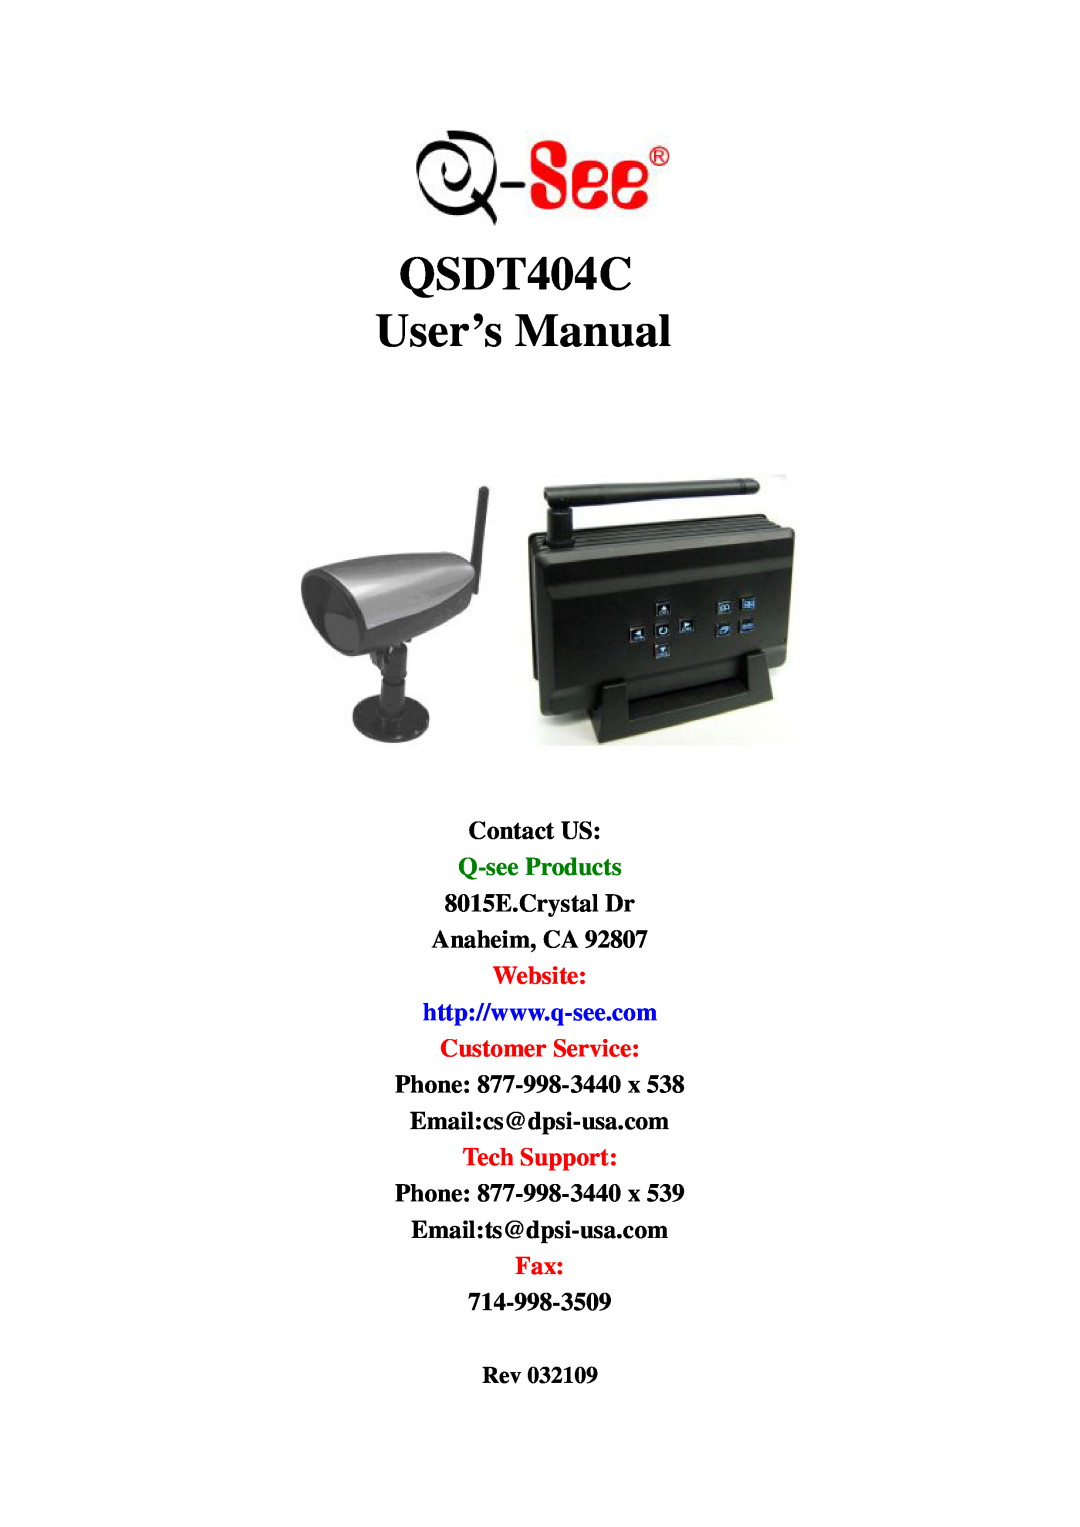 Q-See QSDT404C user manual Contact US, Q-seeProducts, 8015E.Crystal Dr Anaheim, CA, Website, Customer Service 